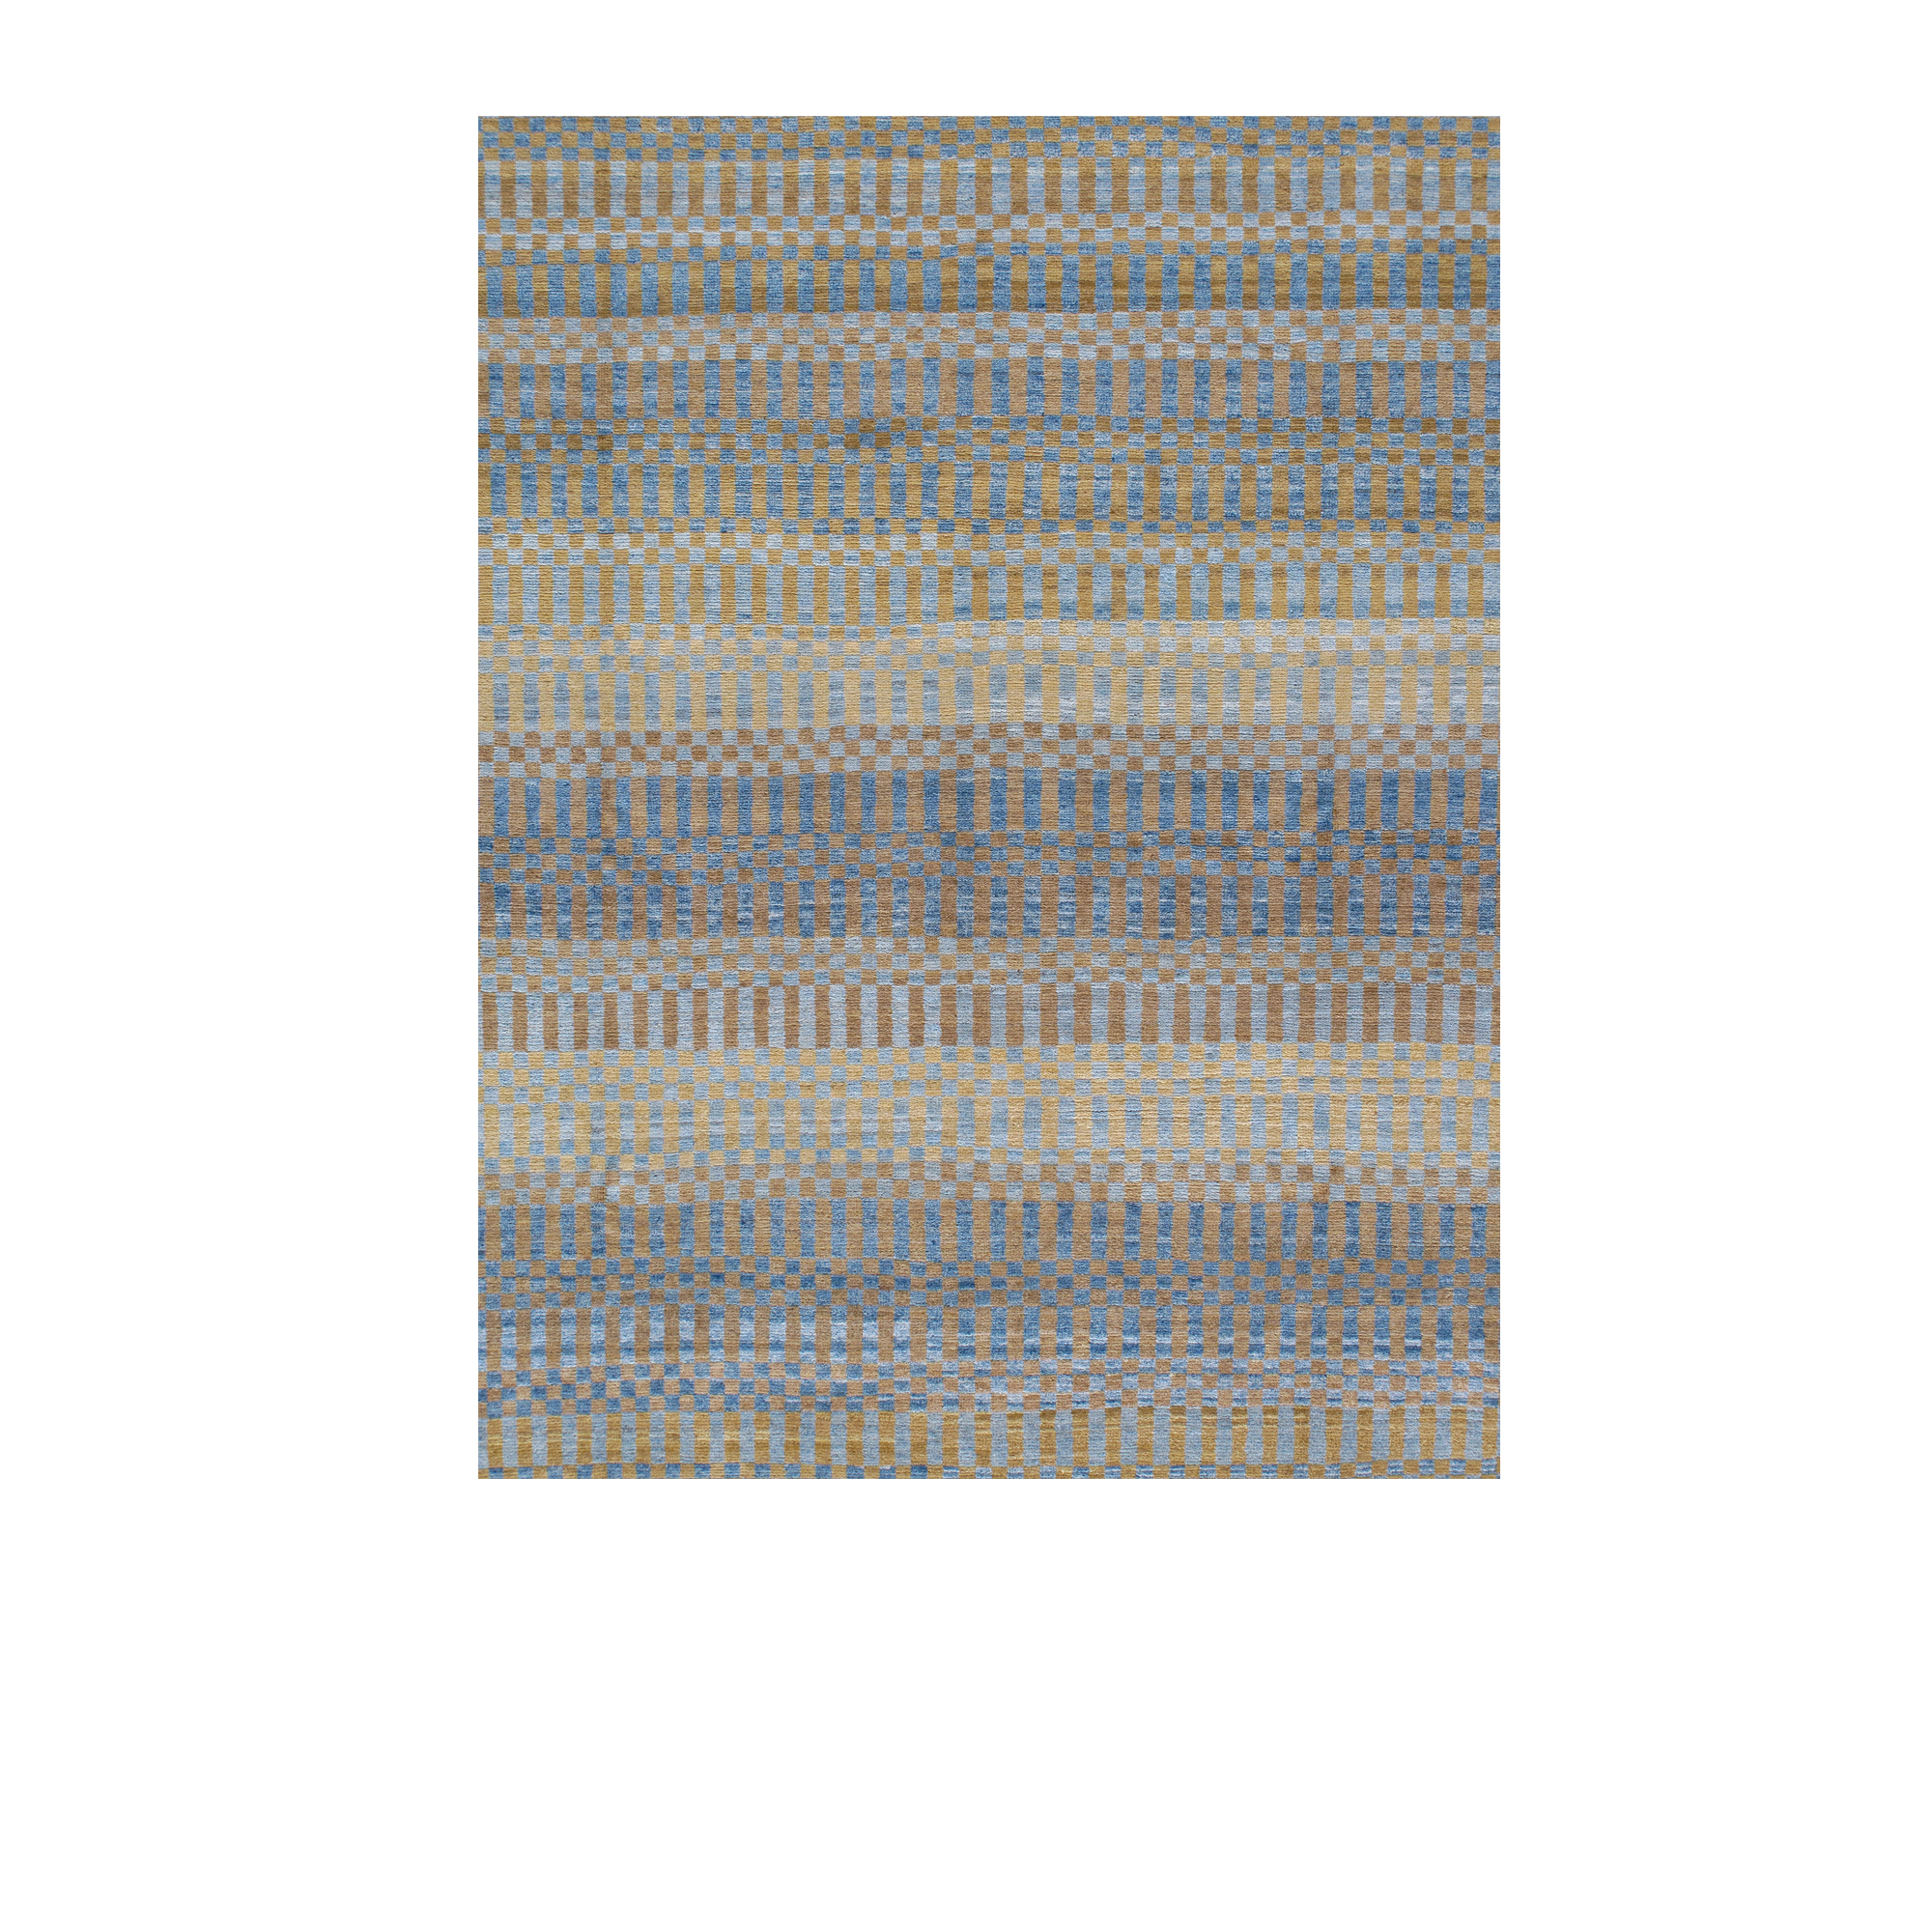 This Modern Shiraz rug is hand-knotted and made of 100% wool.